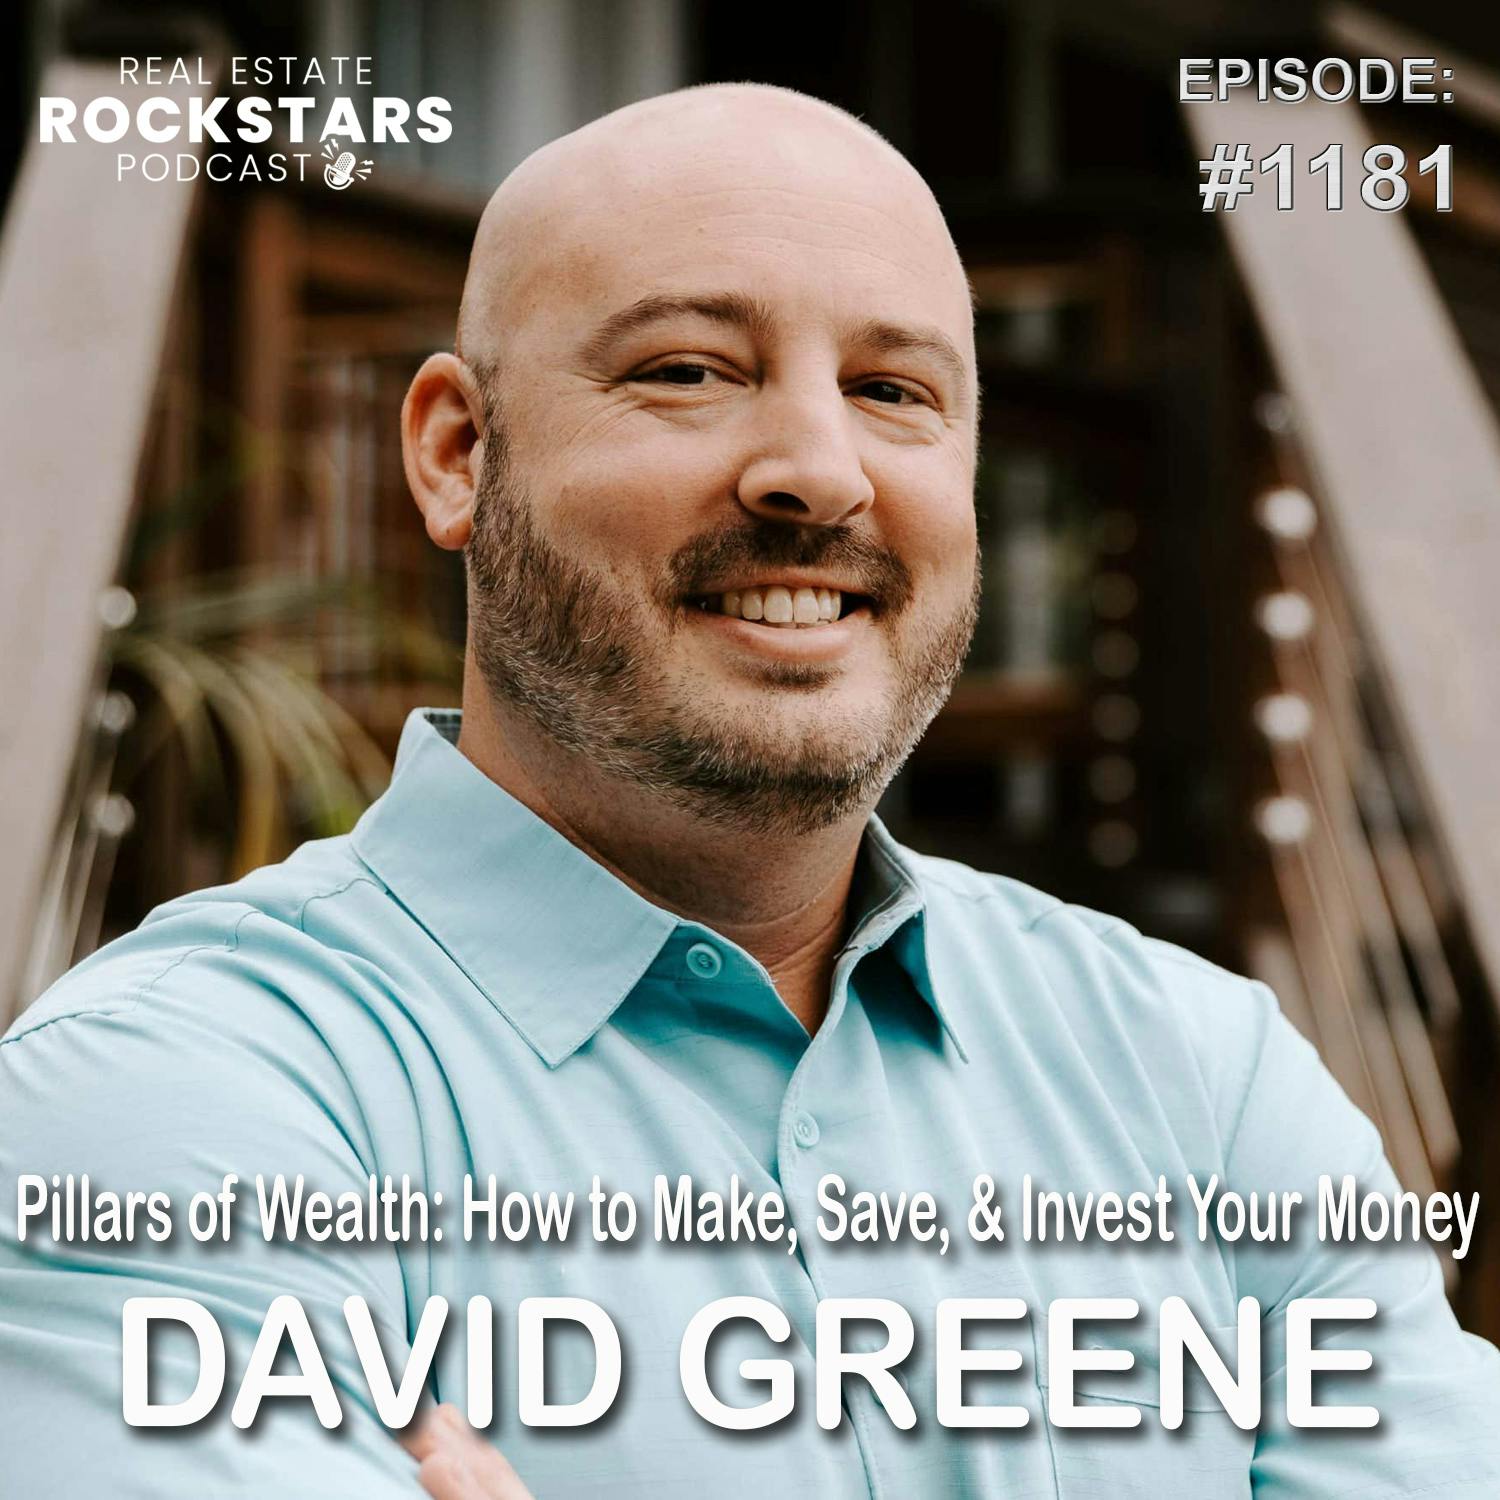 1181: David Greene's Pillars of Wealth: How to Make, Save, & Invest Your Money